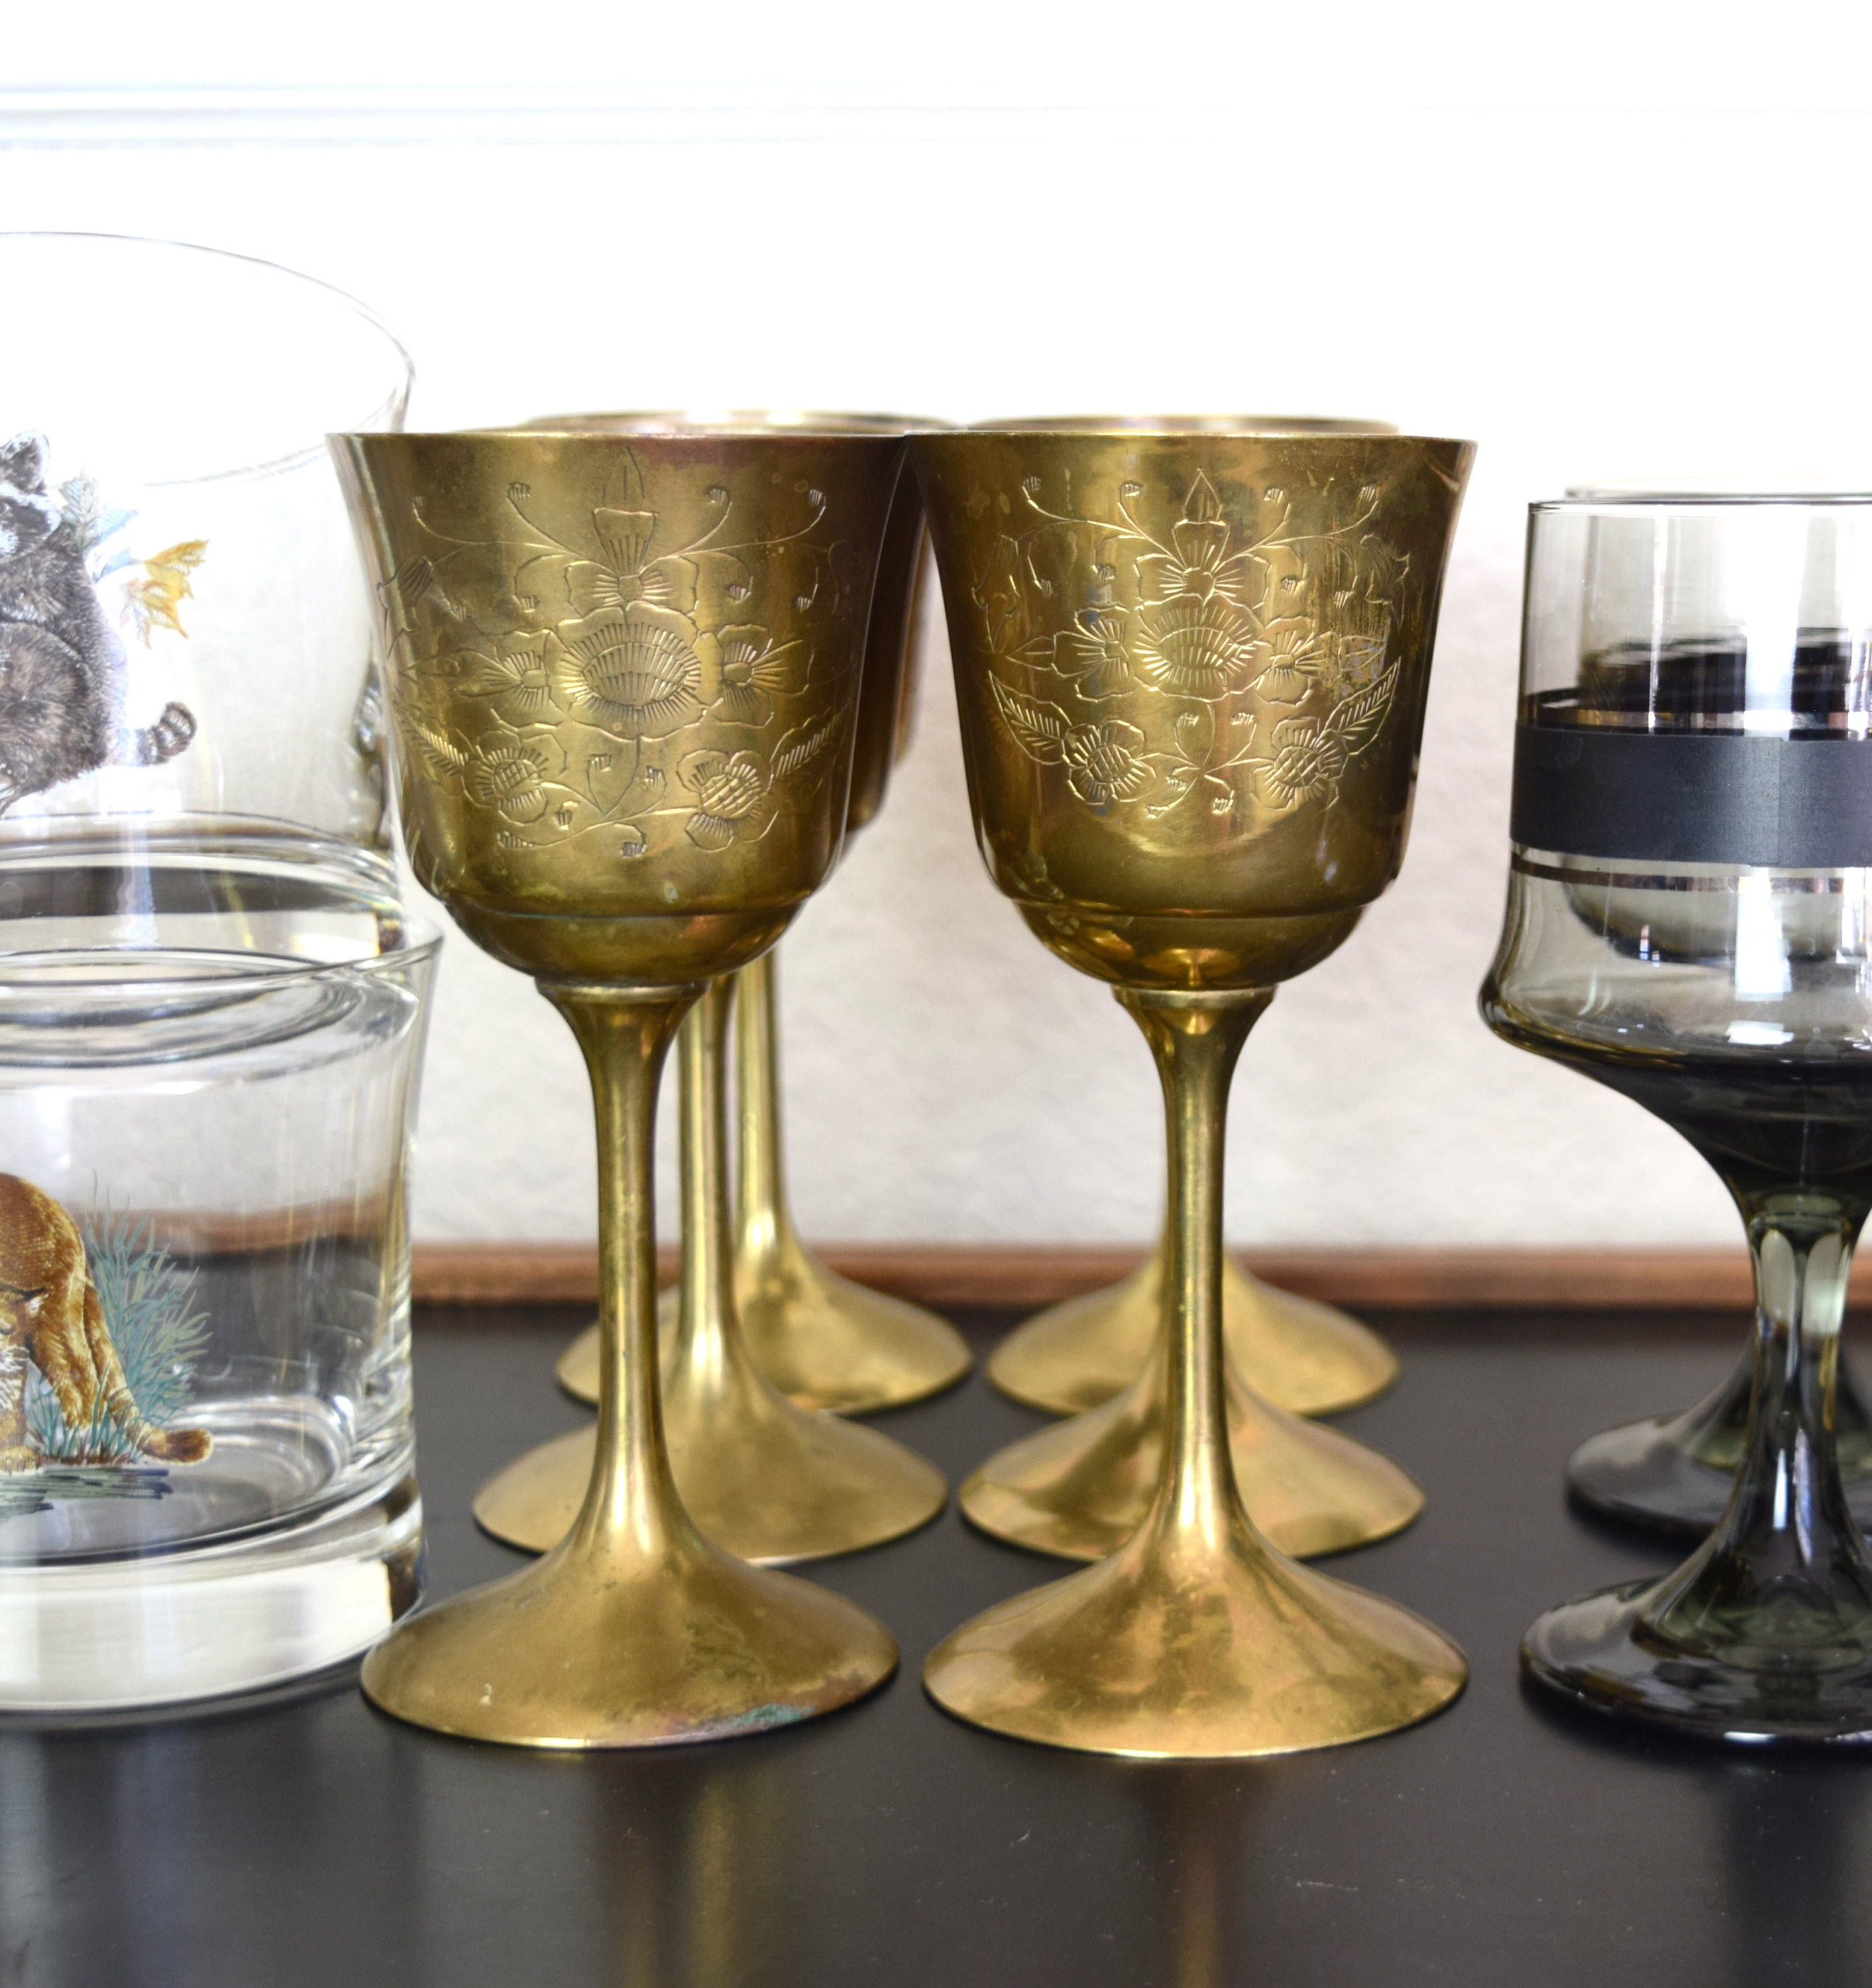 Vintage brass wine glasses6 small wine glasses etched with Saudi Arabia  on one side and flowers on othermade in Pakistan.